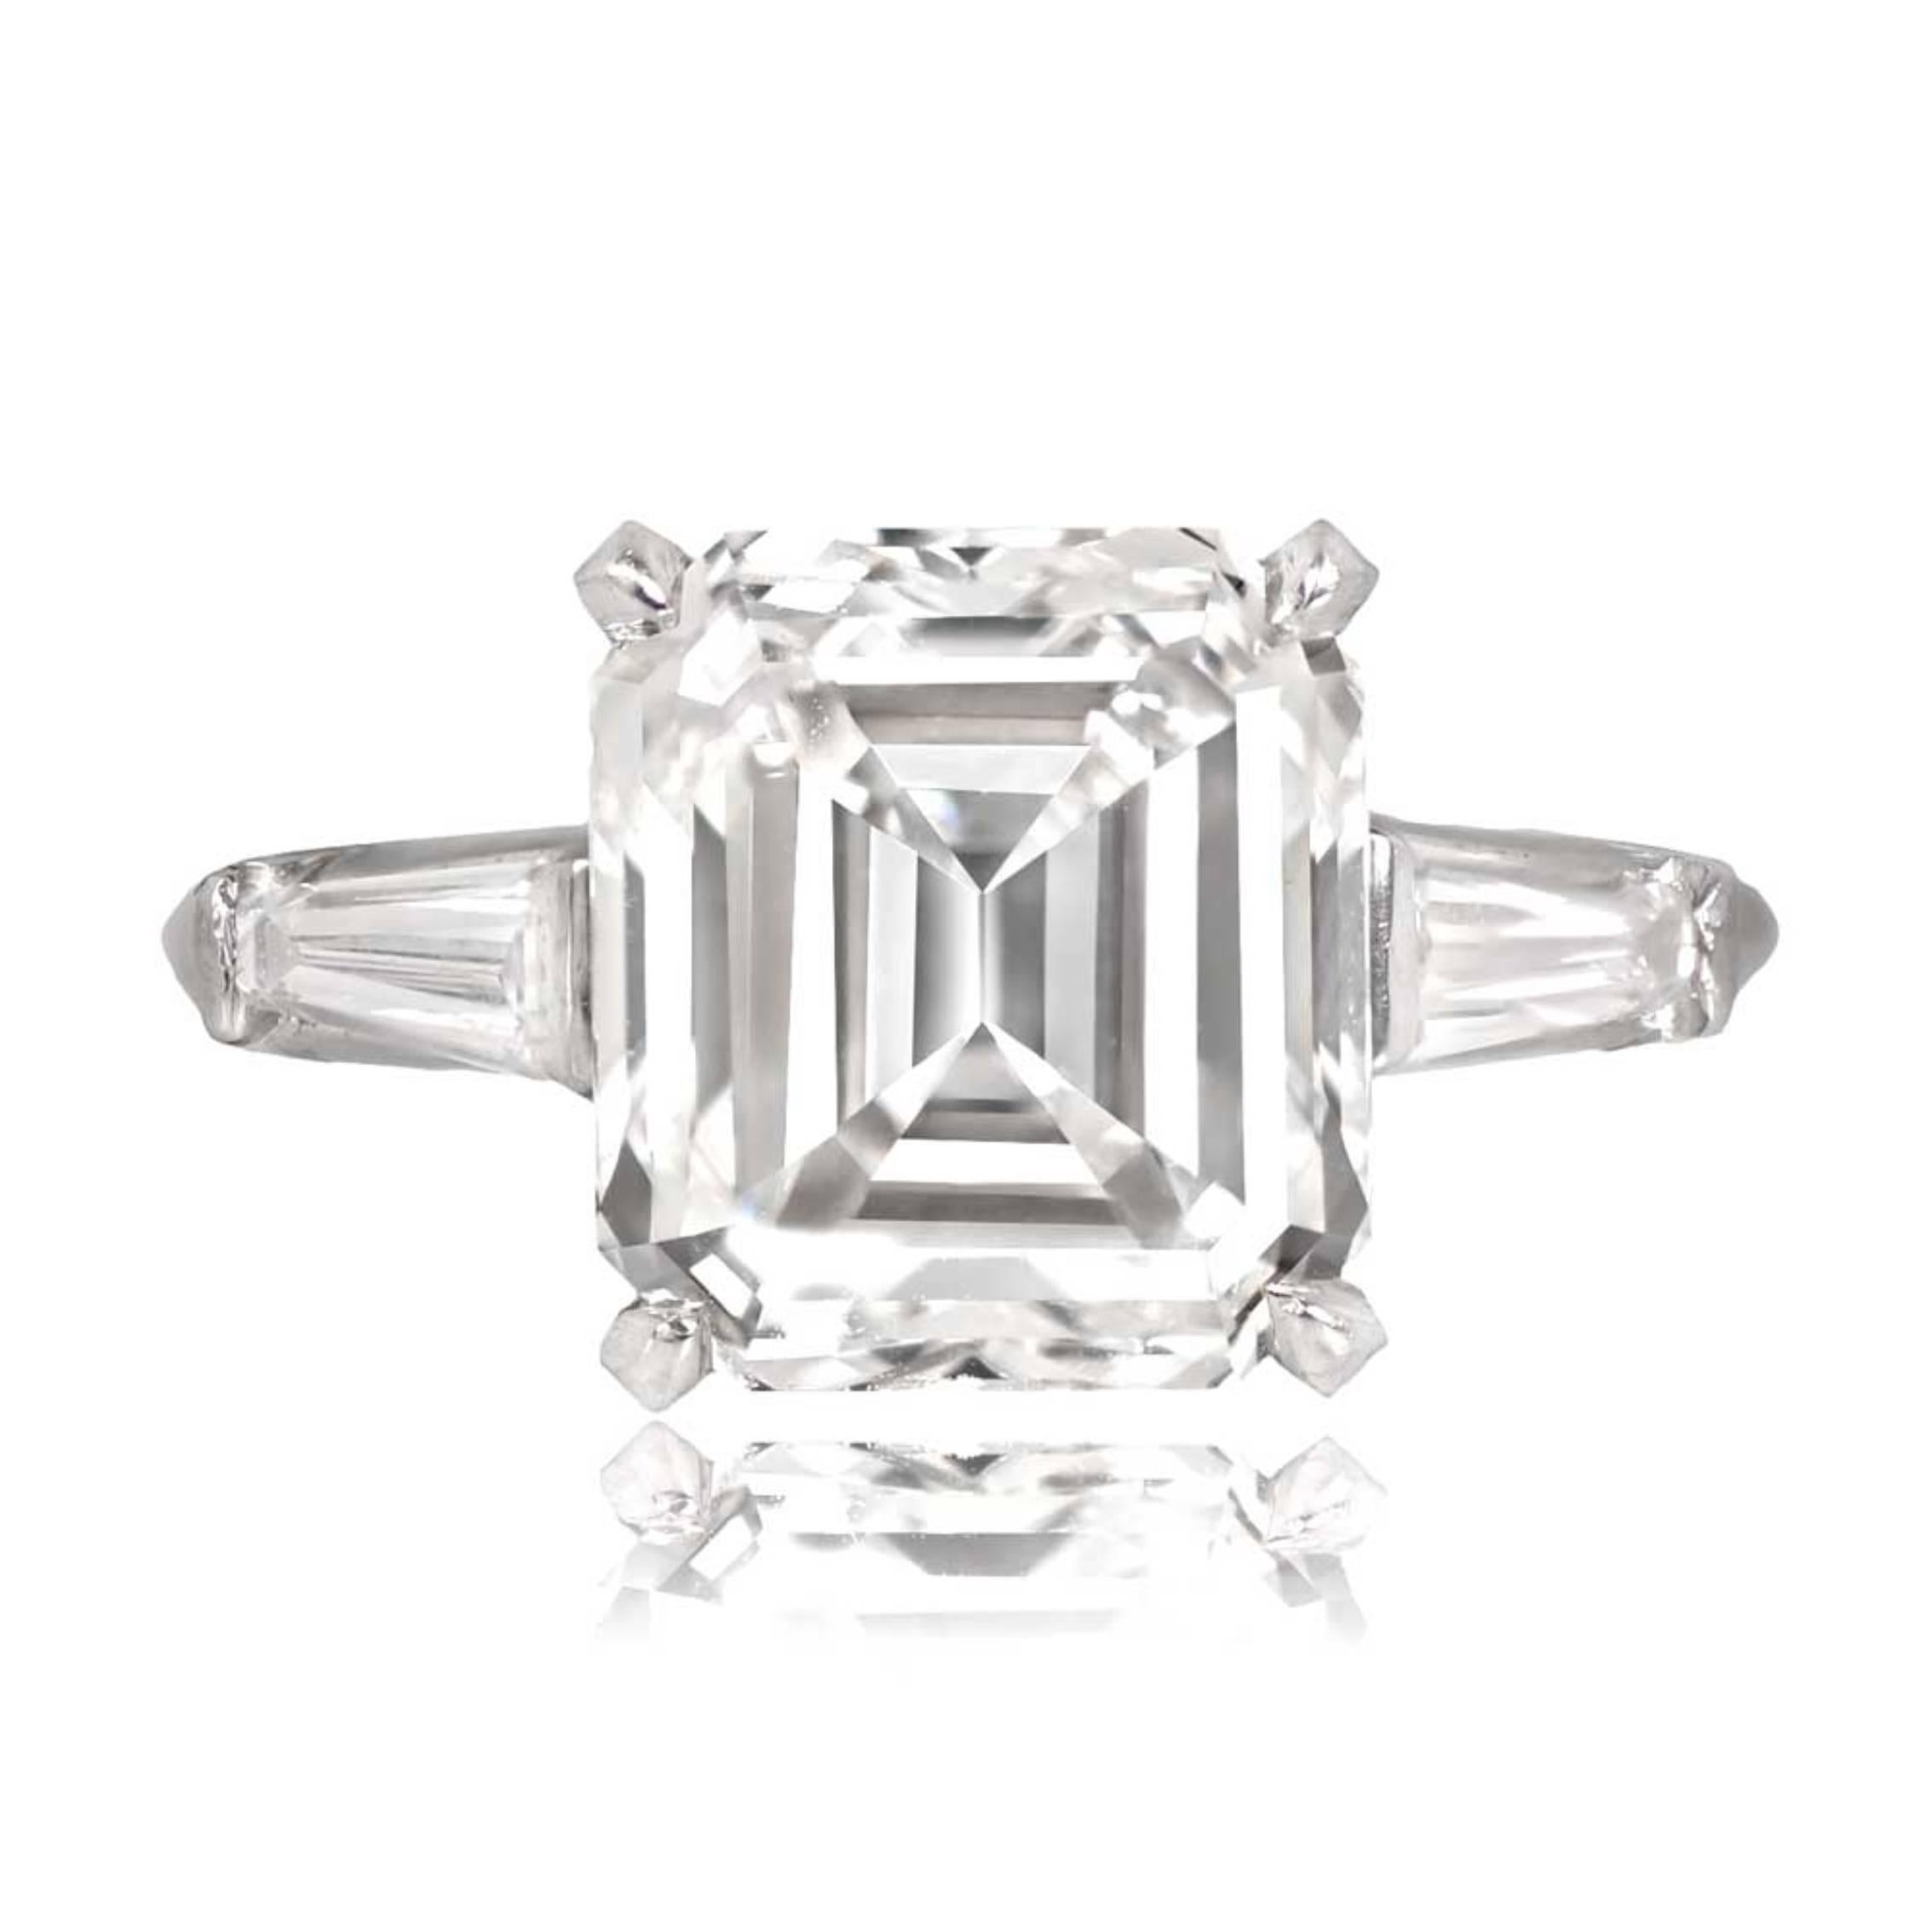 A platinum engagement ring with a GIA-certified 5.09-carat emerald-cut diamond at G color and VS1 clarity, set in prongs. It also features tapered baguette-cut diamonds on the shoulders. A copy of the GIA certificate can be provided upon